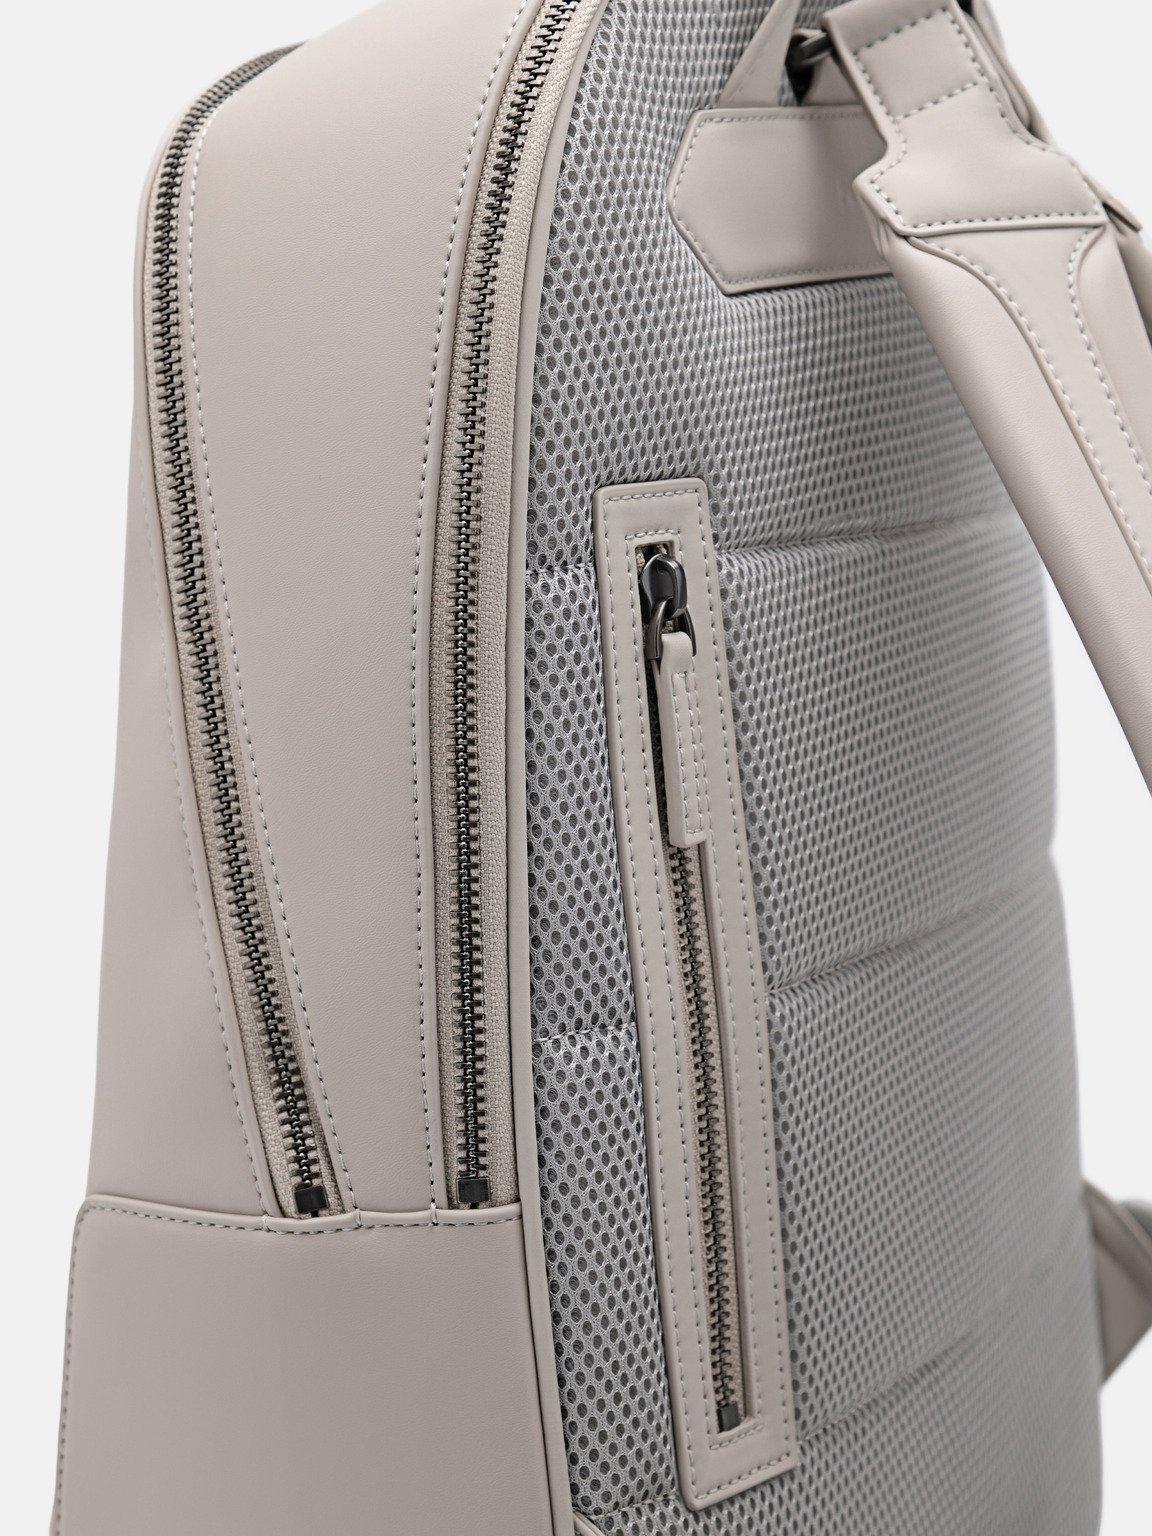 PEDRO Icon Backpack in Pixel, Taupe